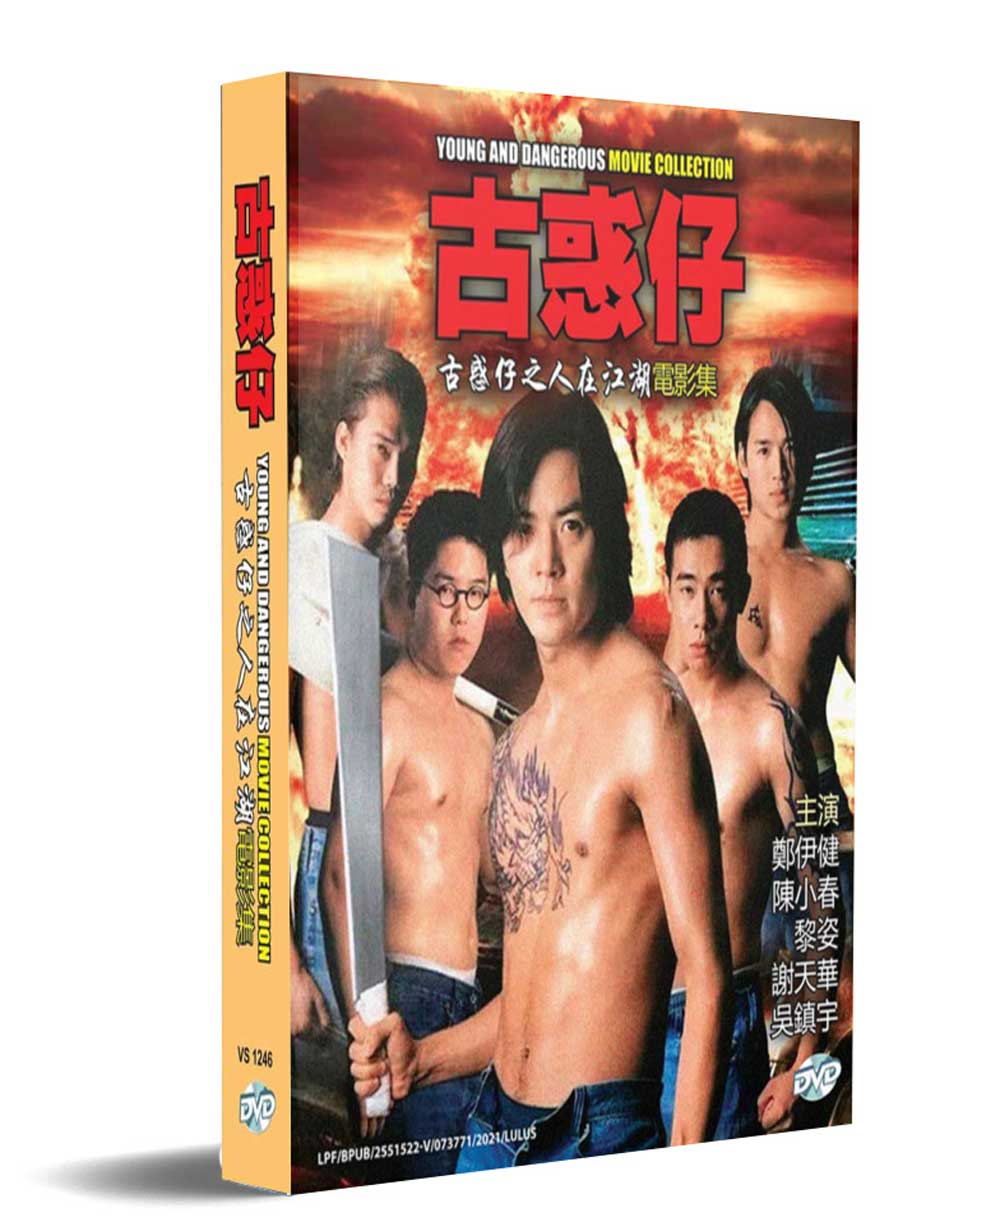 Young and Dangerous Movie Collection (DVD) (1996–2000) Hong Kong Movie